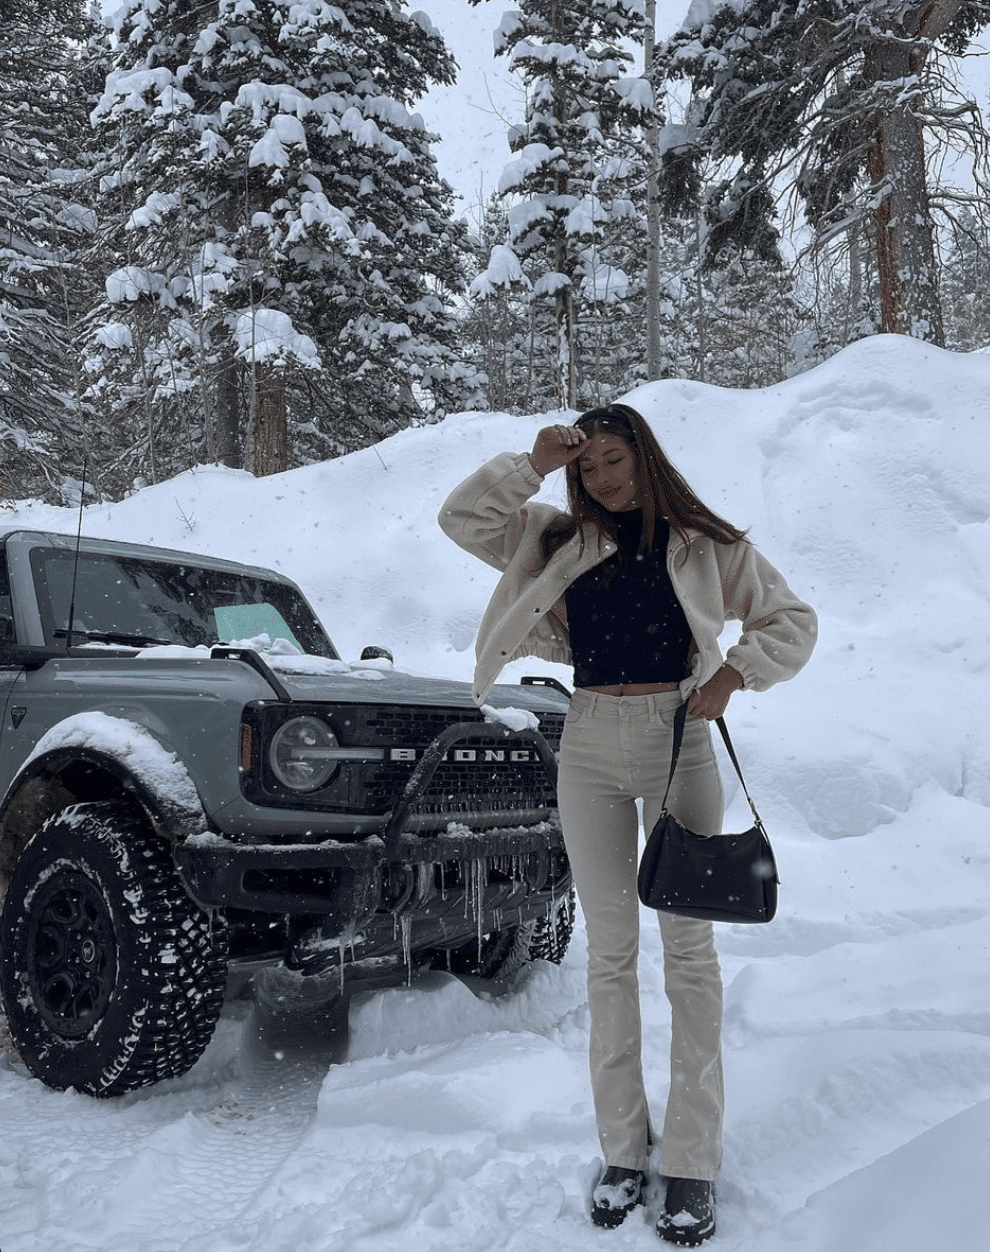 beige and black ski trip outfit